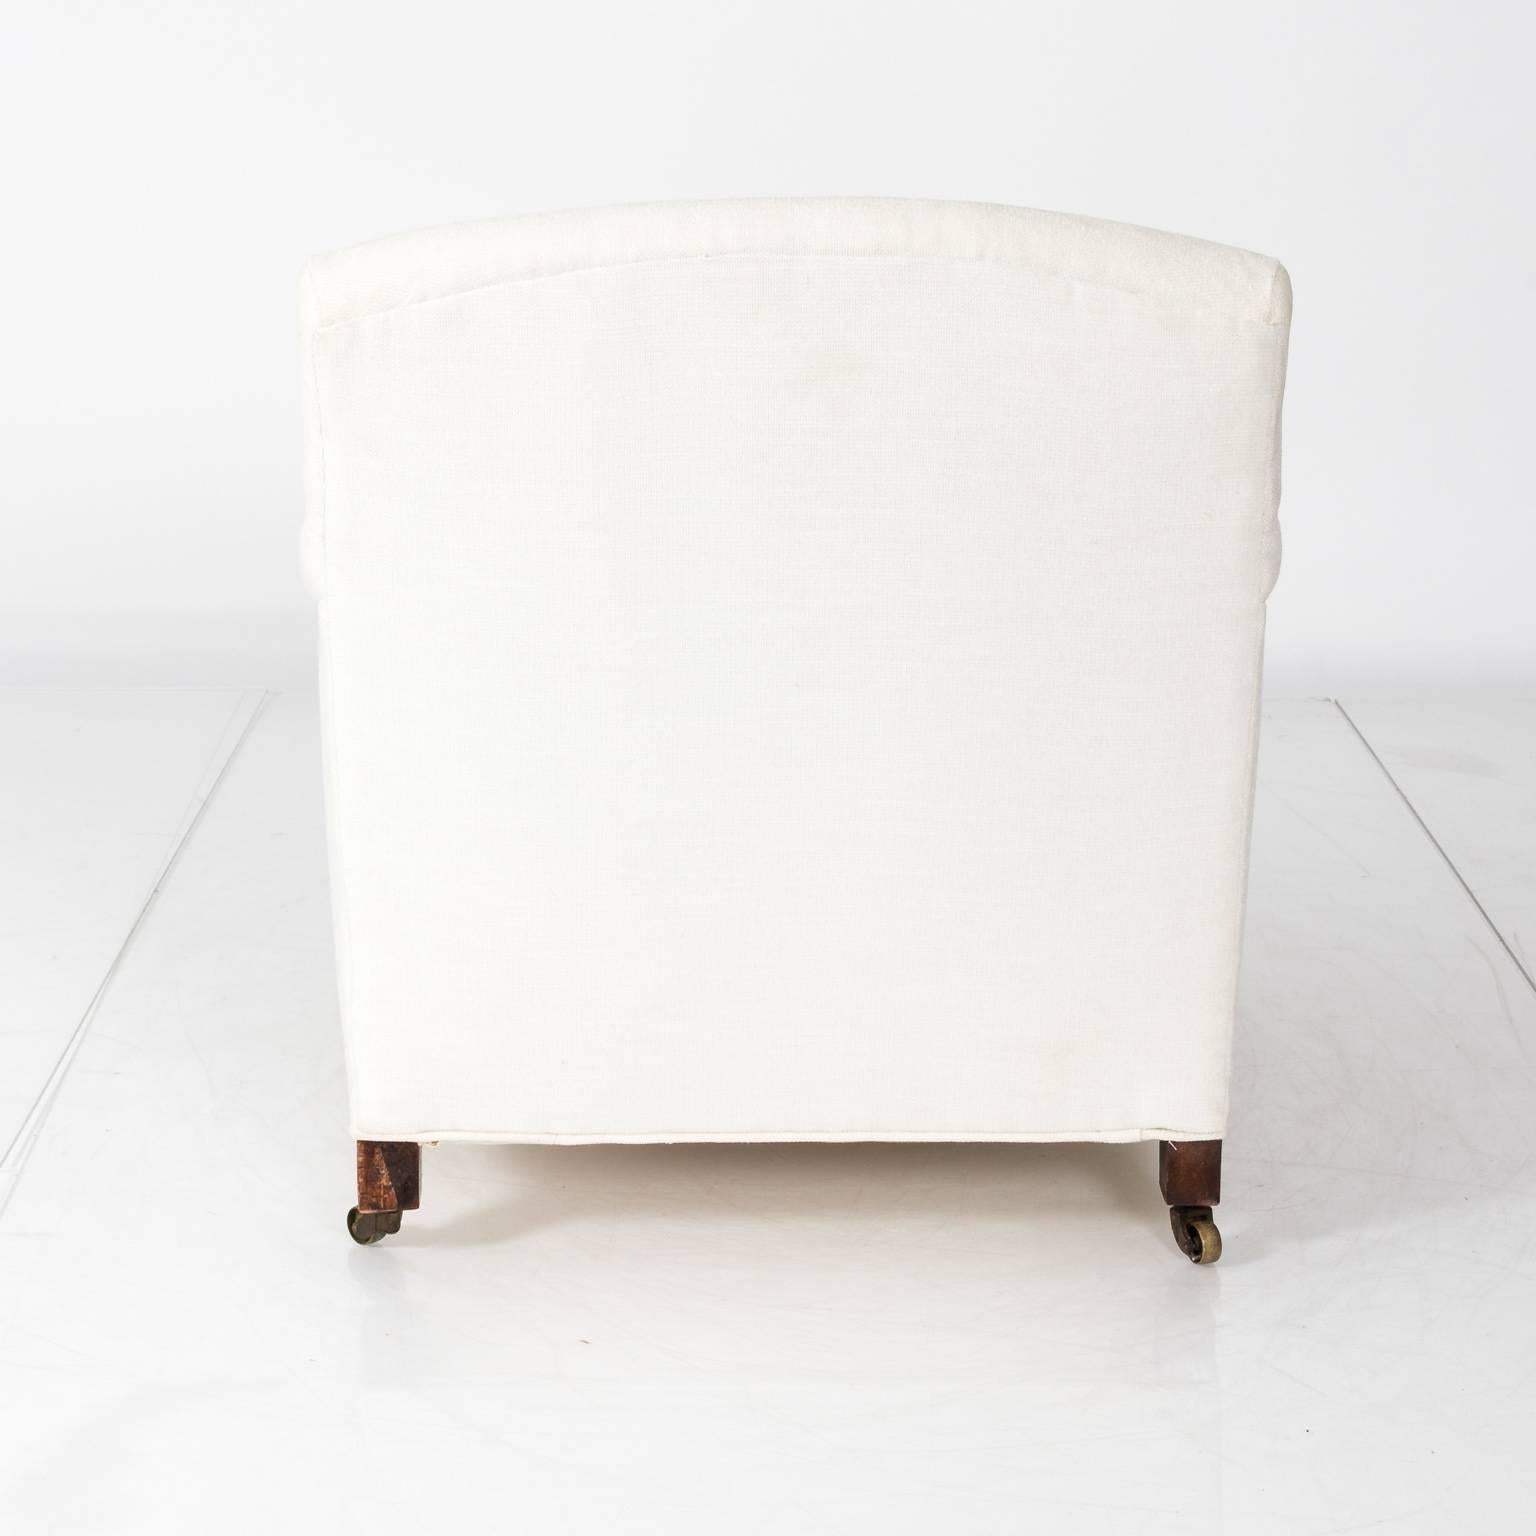 Pair of vintage club chairs in a white fabric, circa 1930.
    